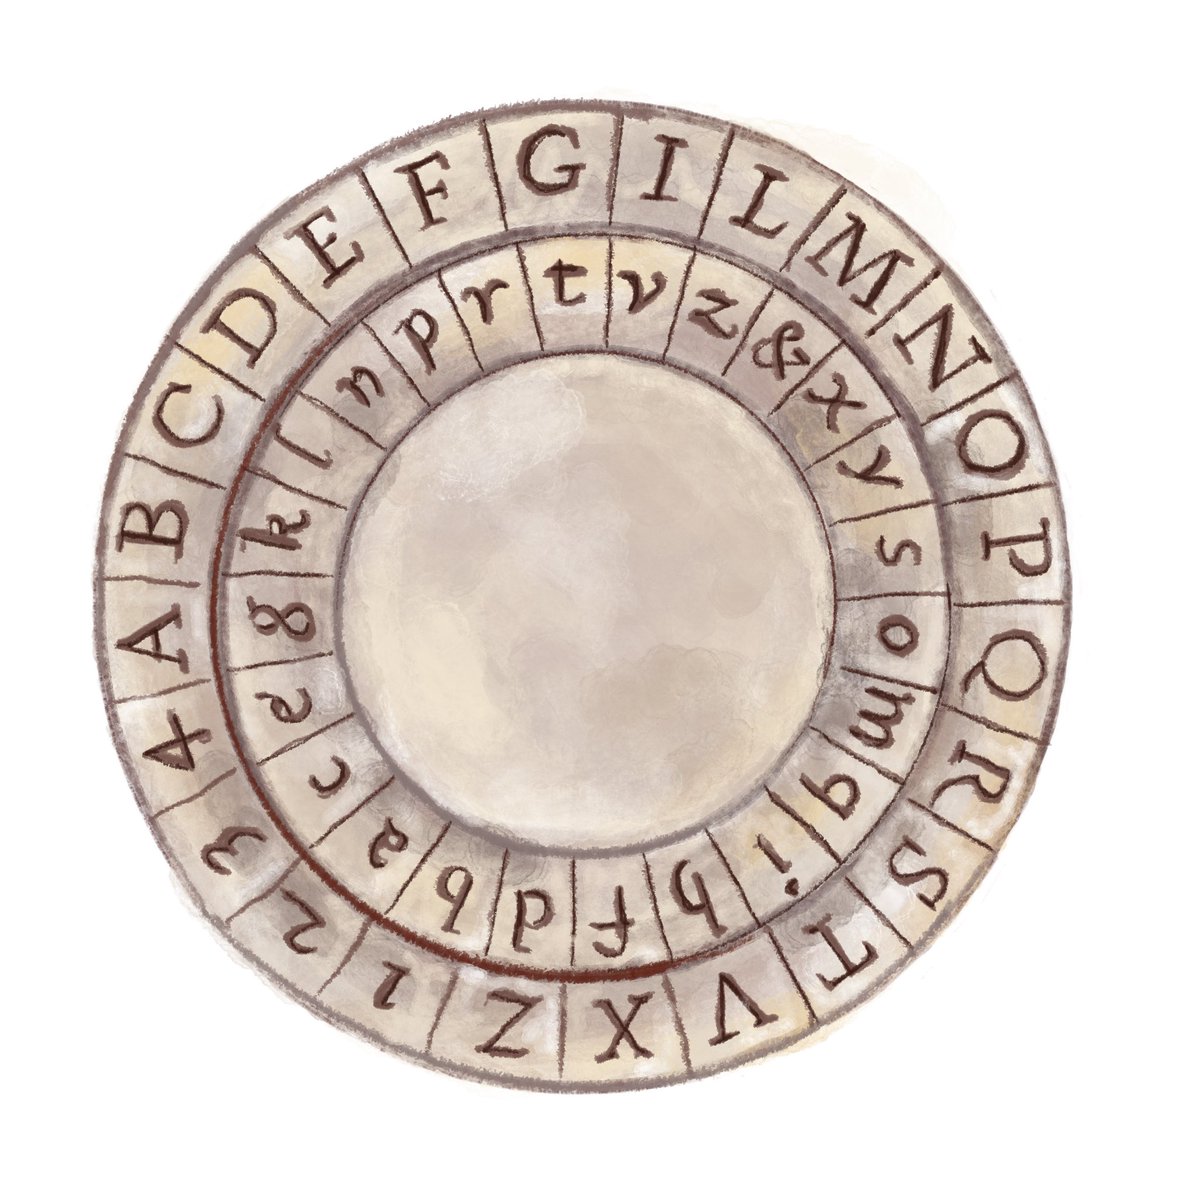 #14Leon Batista Alberti developed the Alberti Cipher in 1467, a type of cipher that revolutionized encryption and to which most of today’s systems of cryptography belong - making him the Father of Western Cryptology.